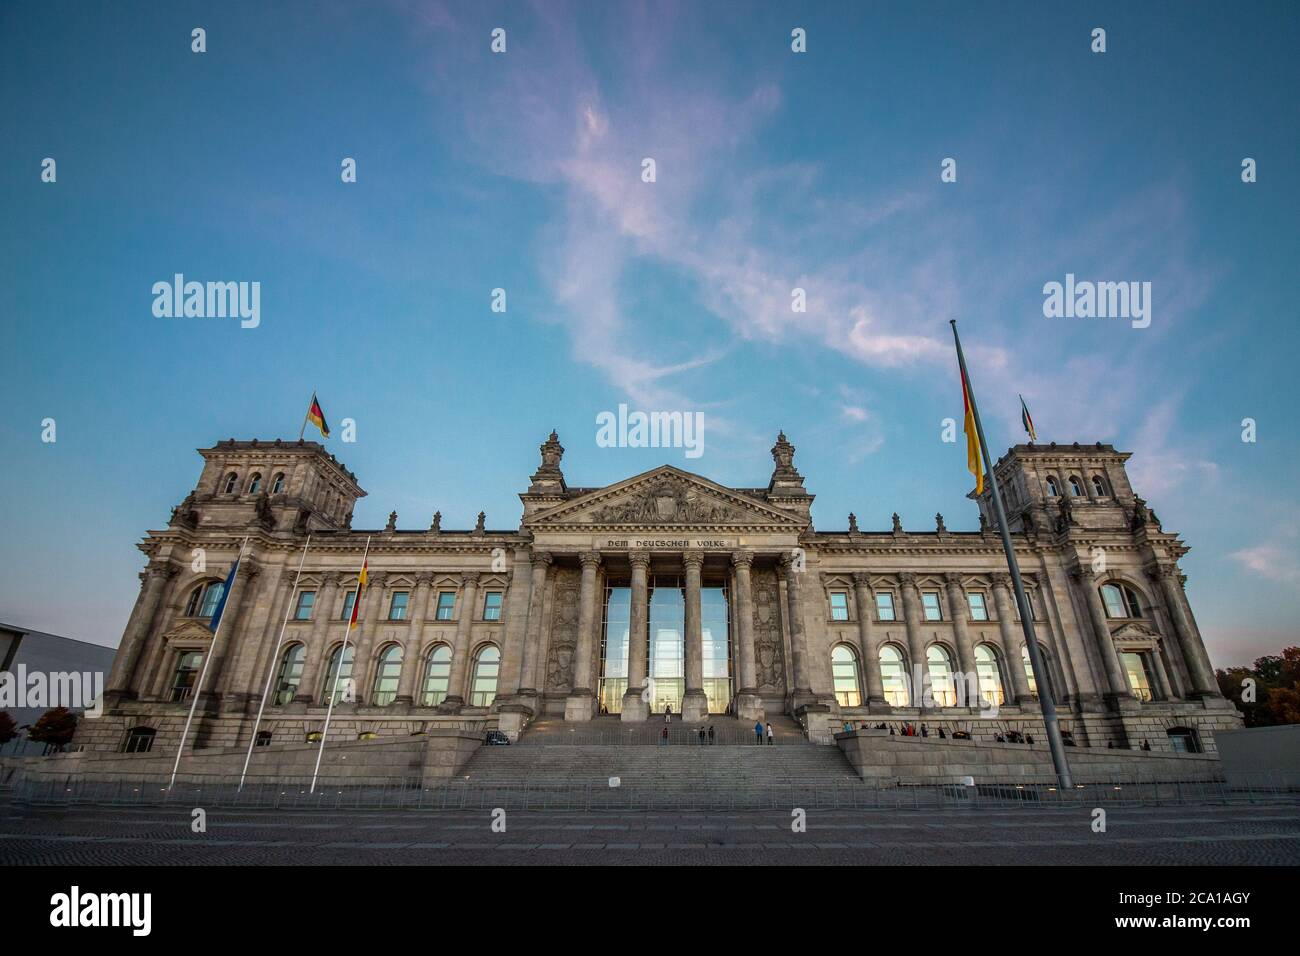 German Reichstag, the German parliament building in Berlin at sunset. Some german flags and one European waving. Politics and architecture concepts. Stock Photo